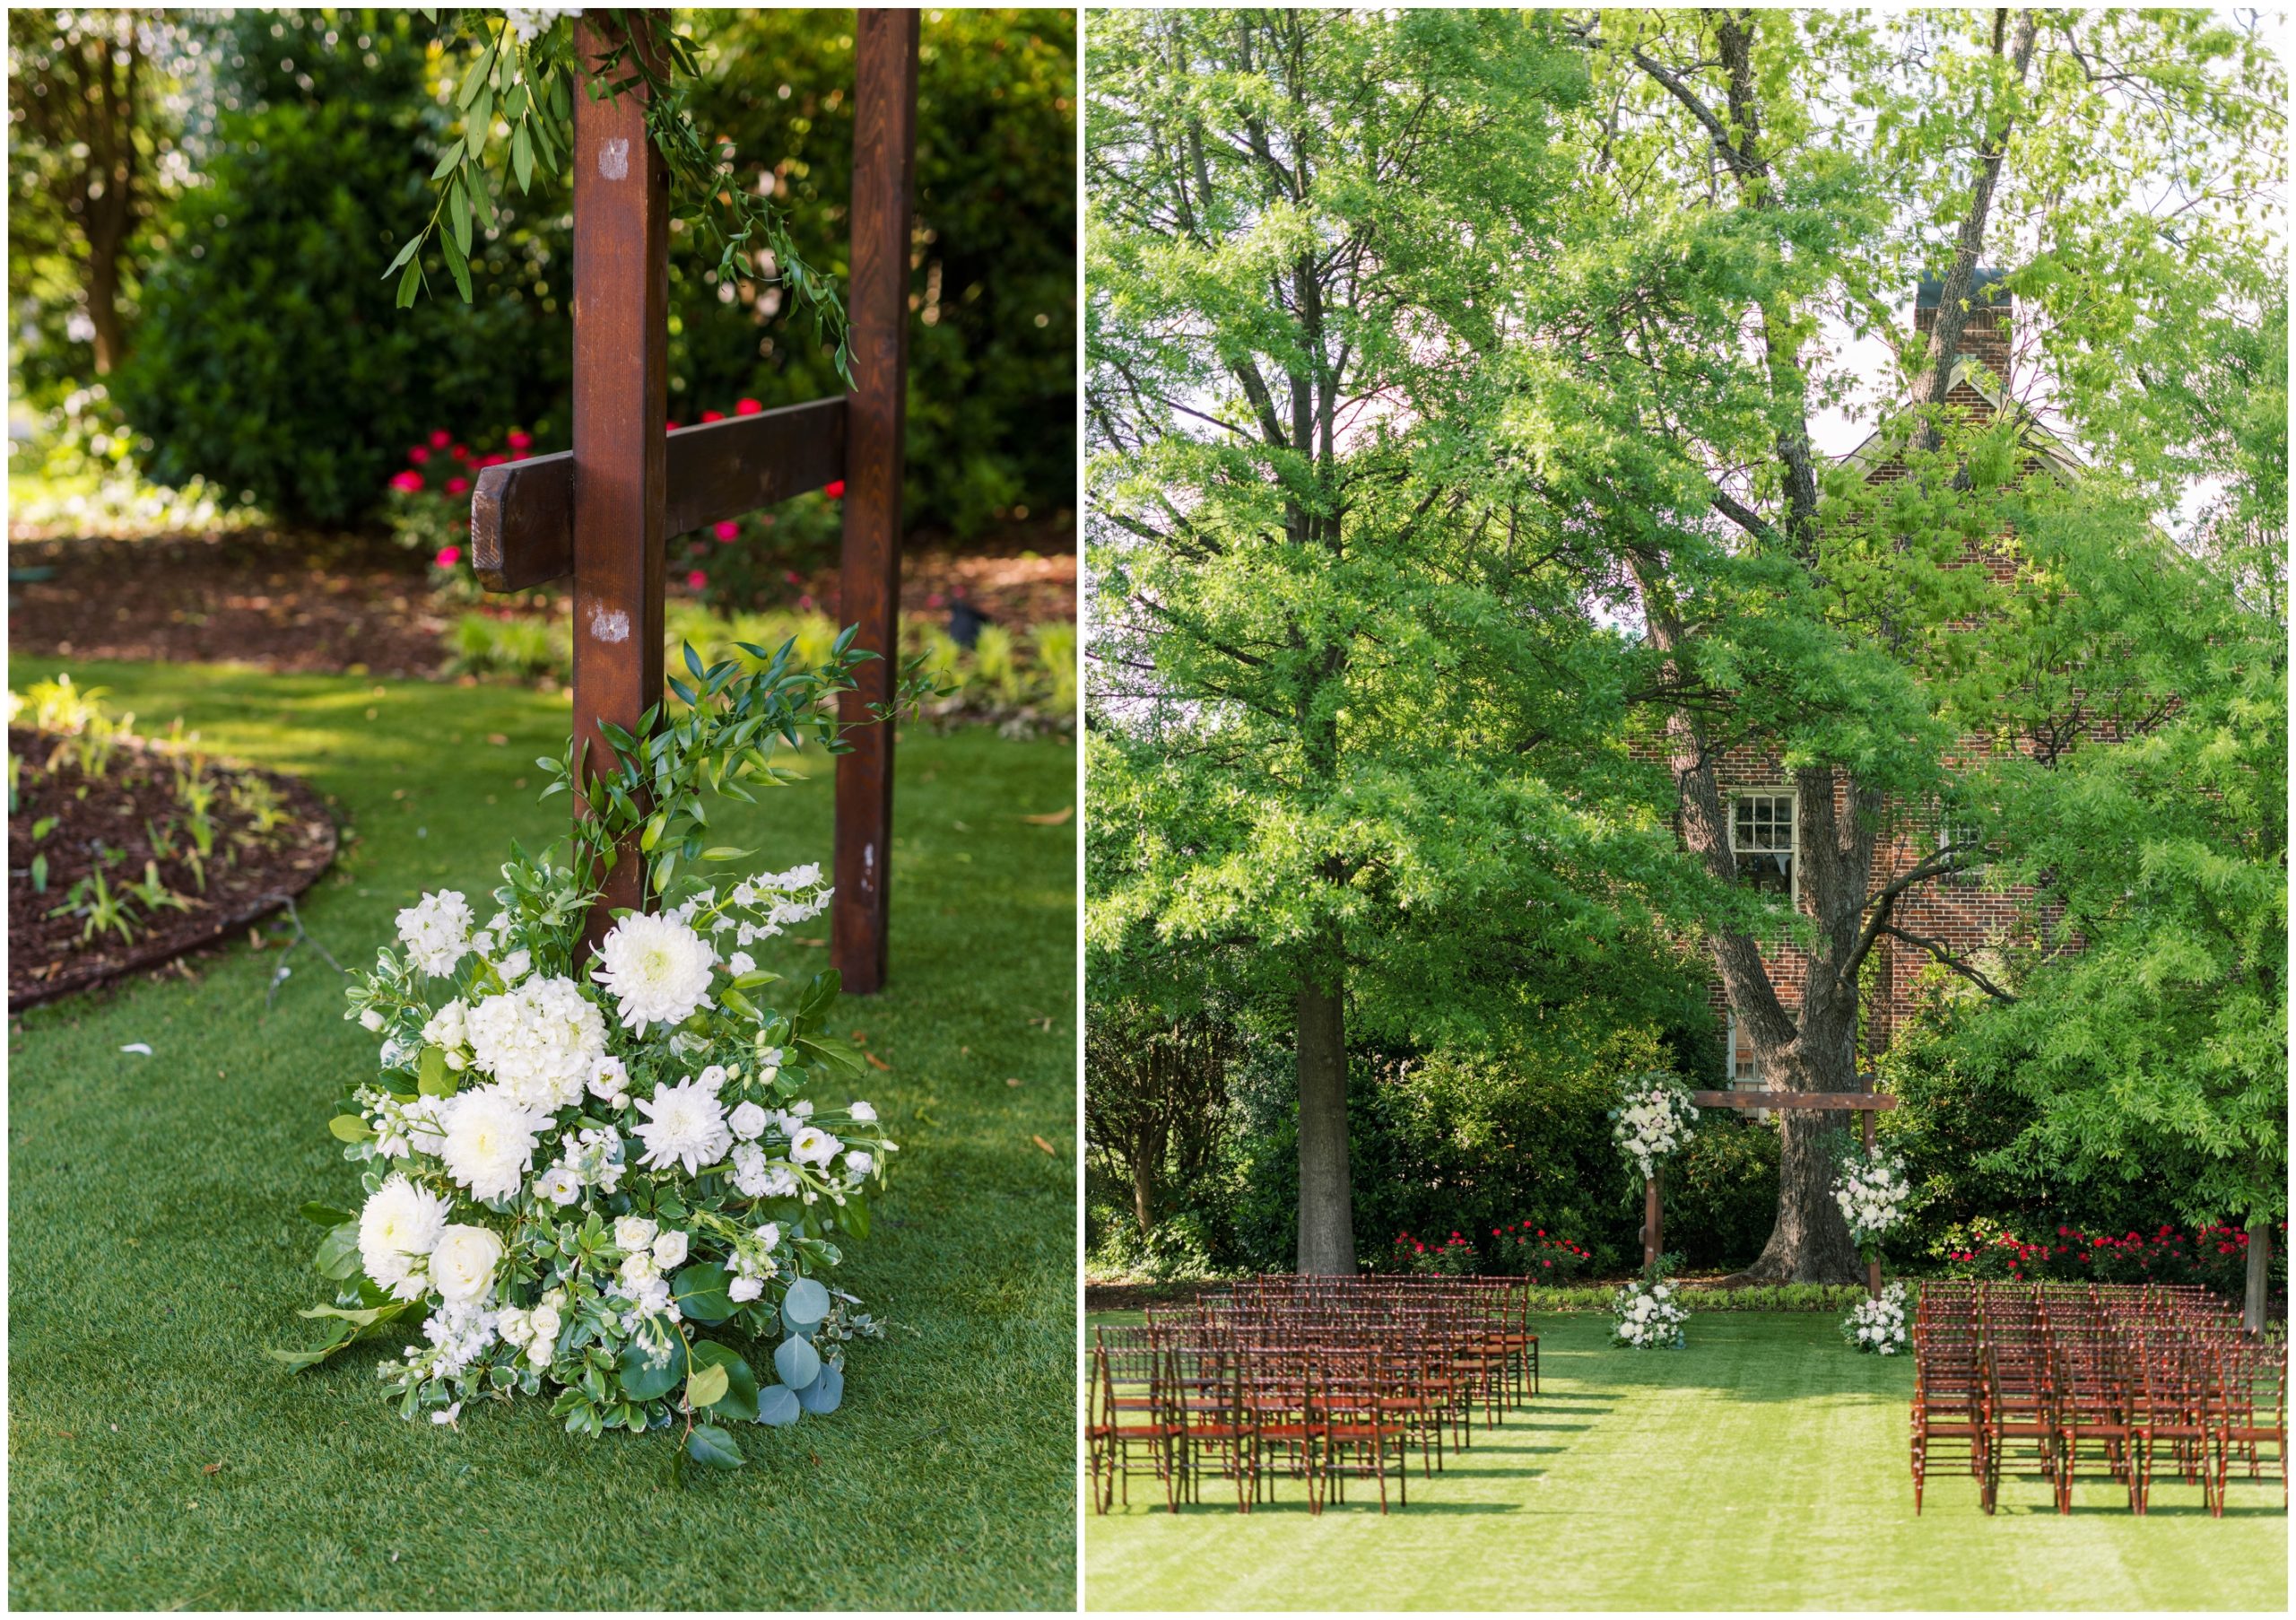 A wooden arch, red chairs, and blush-and-white floral arrangements for a spring outdoor wedding ceremony